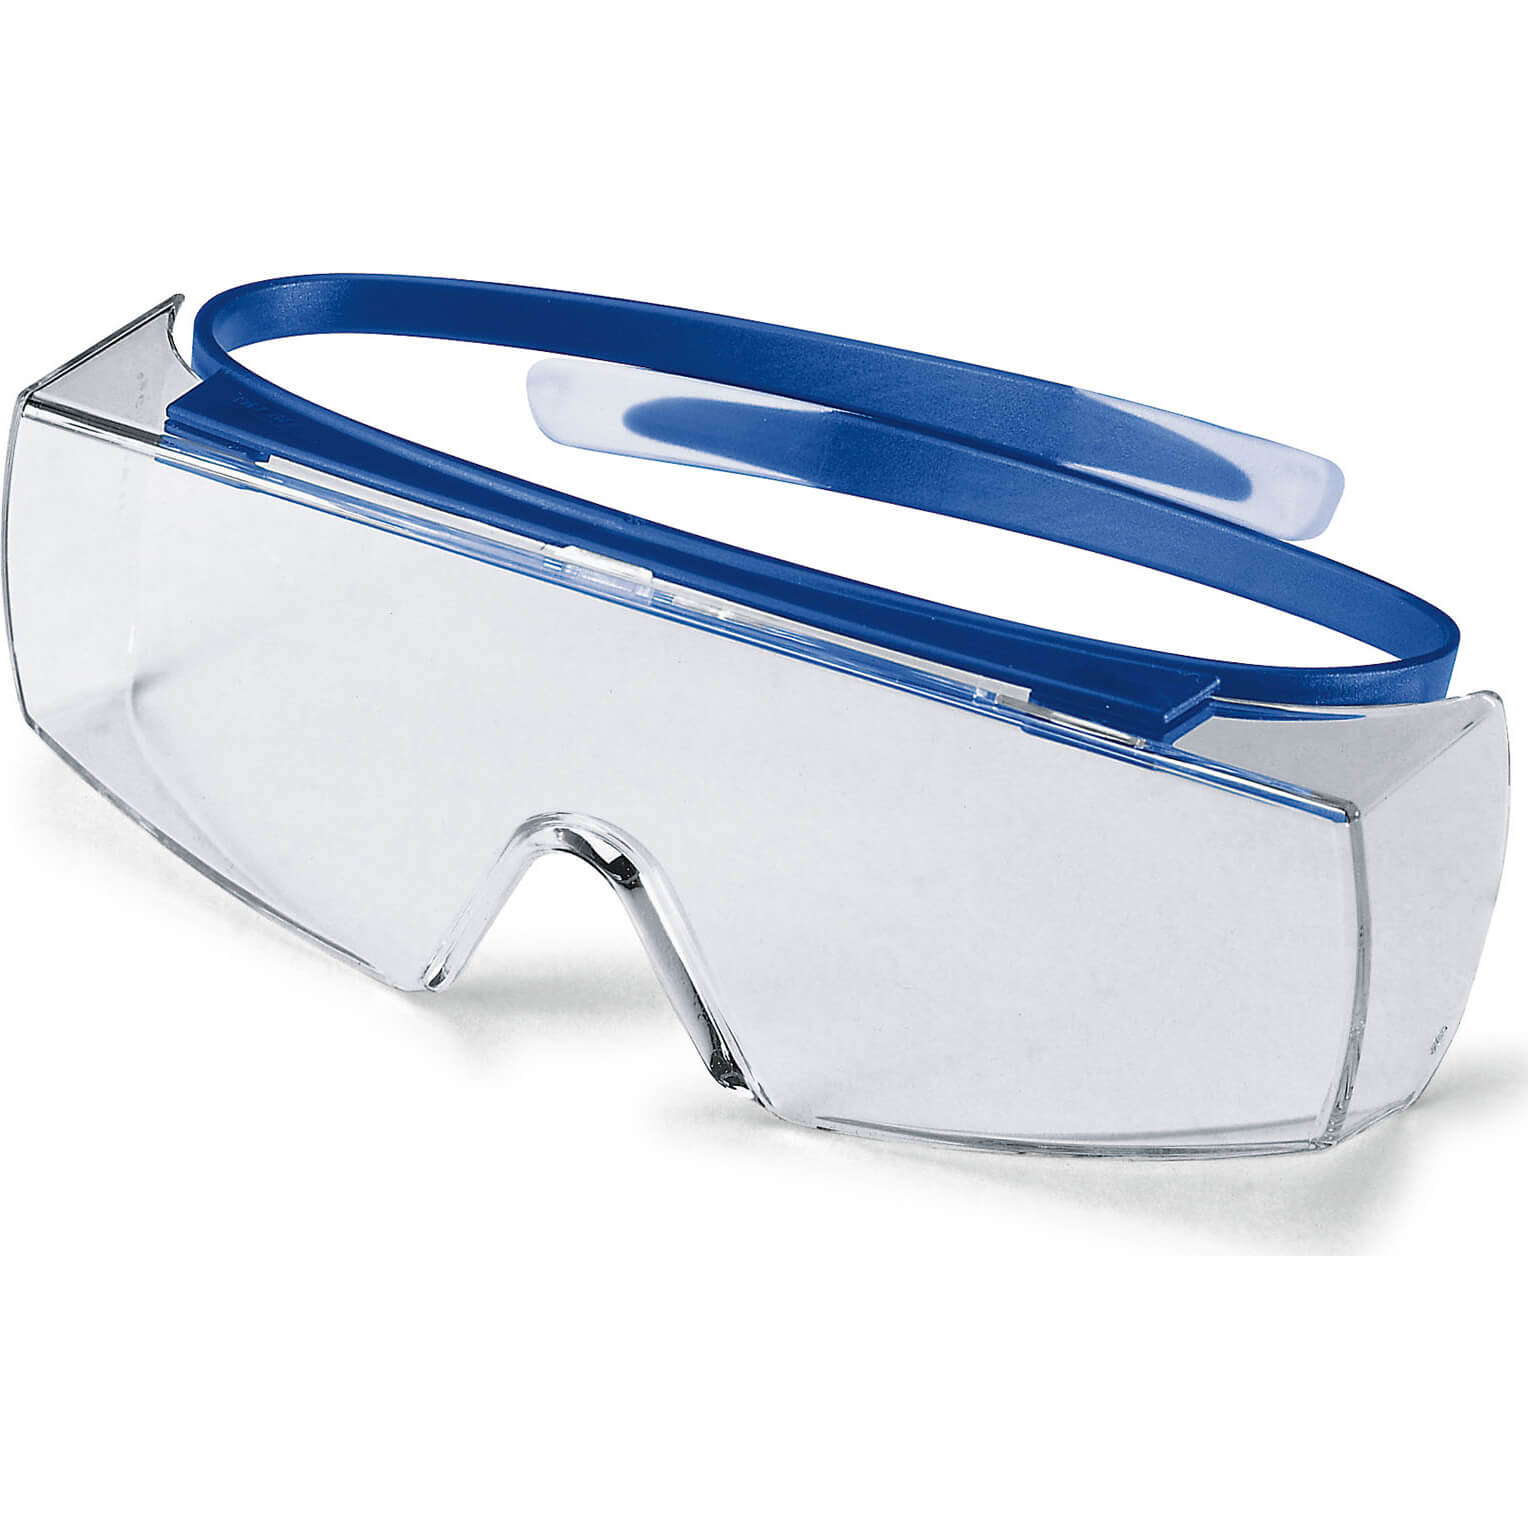 Photo of Uvex Super Otg Safety Glasses Blue Clear